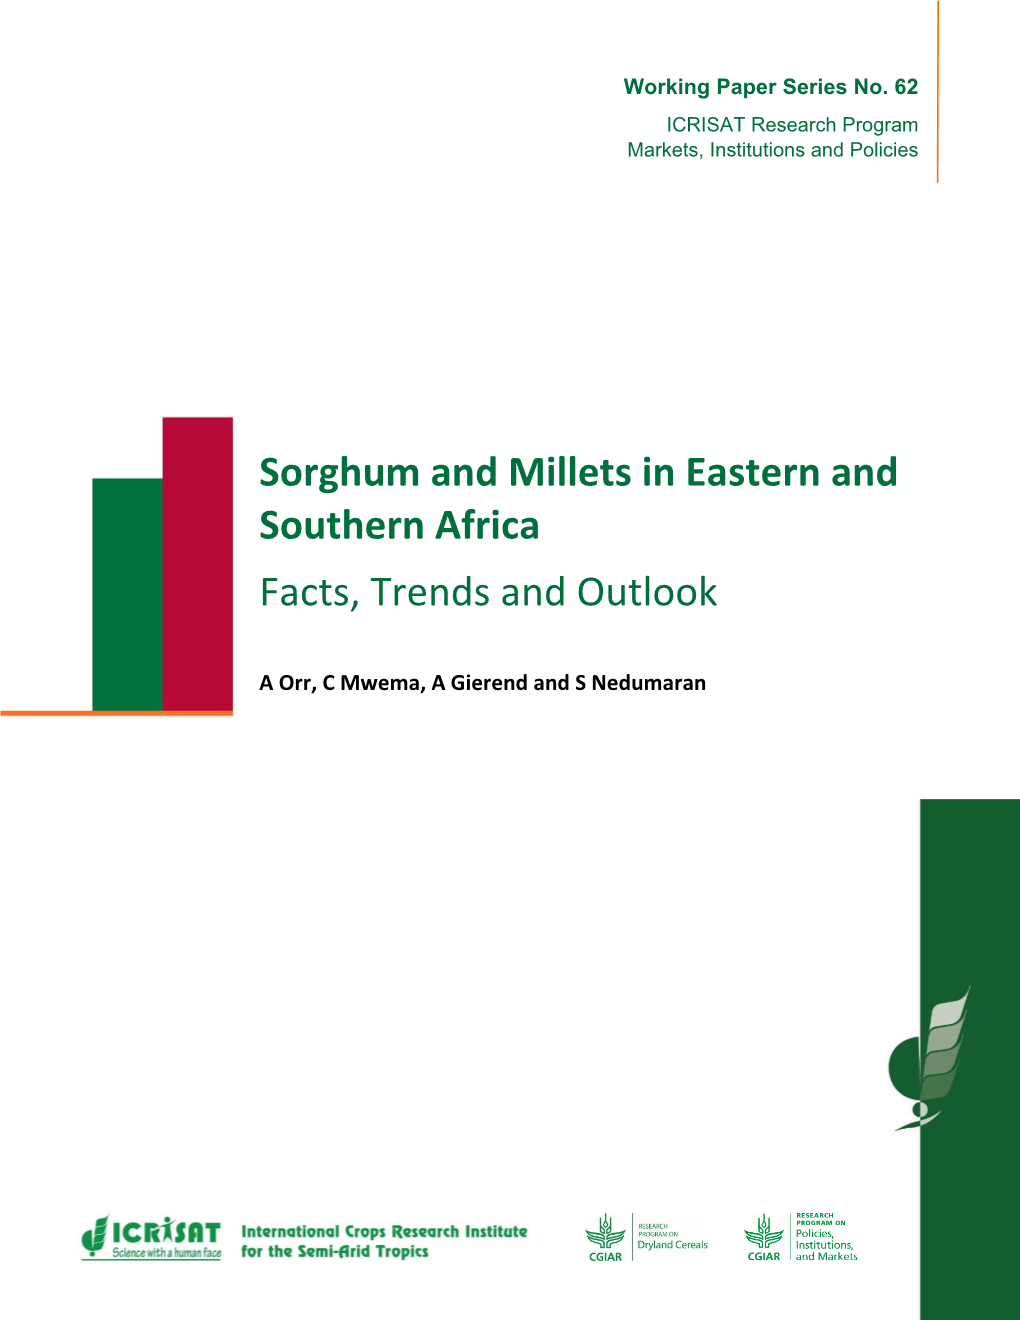 Sorghum and Millets in Eastern and Southern Africa Facts, Trends And